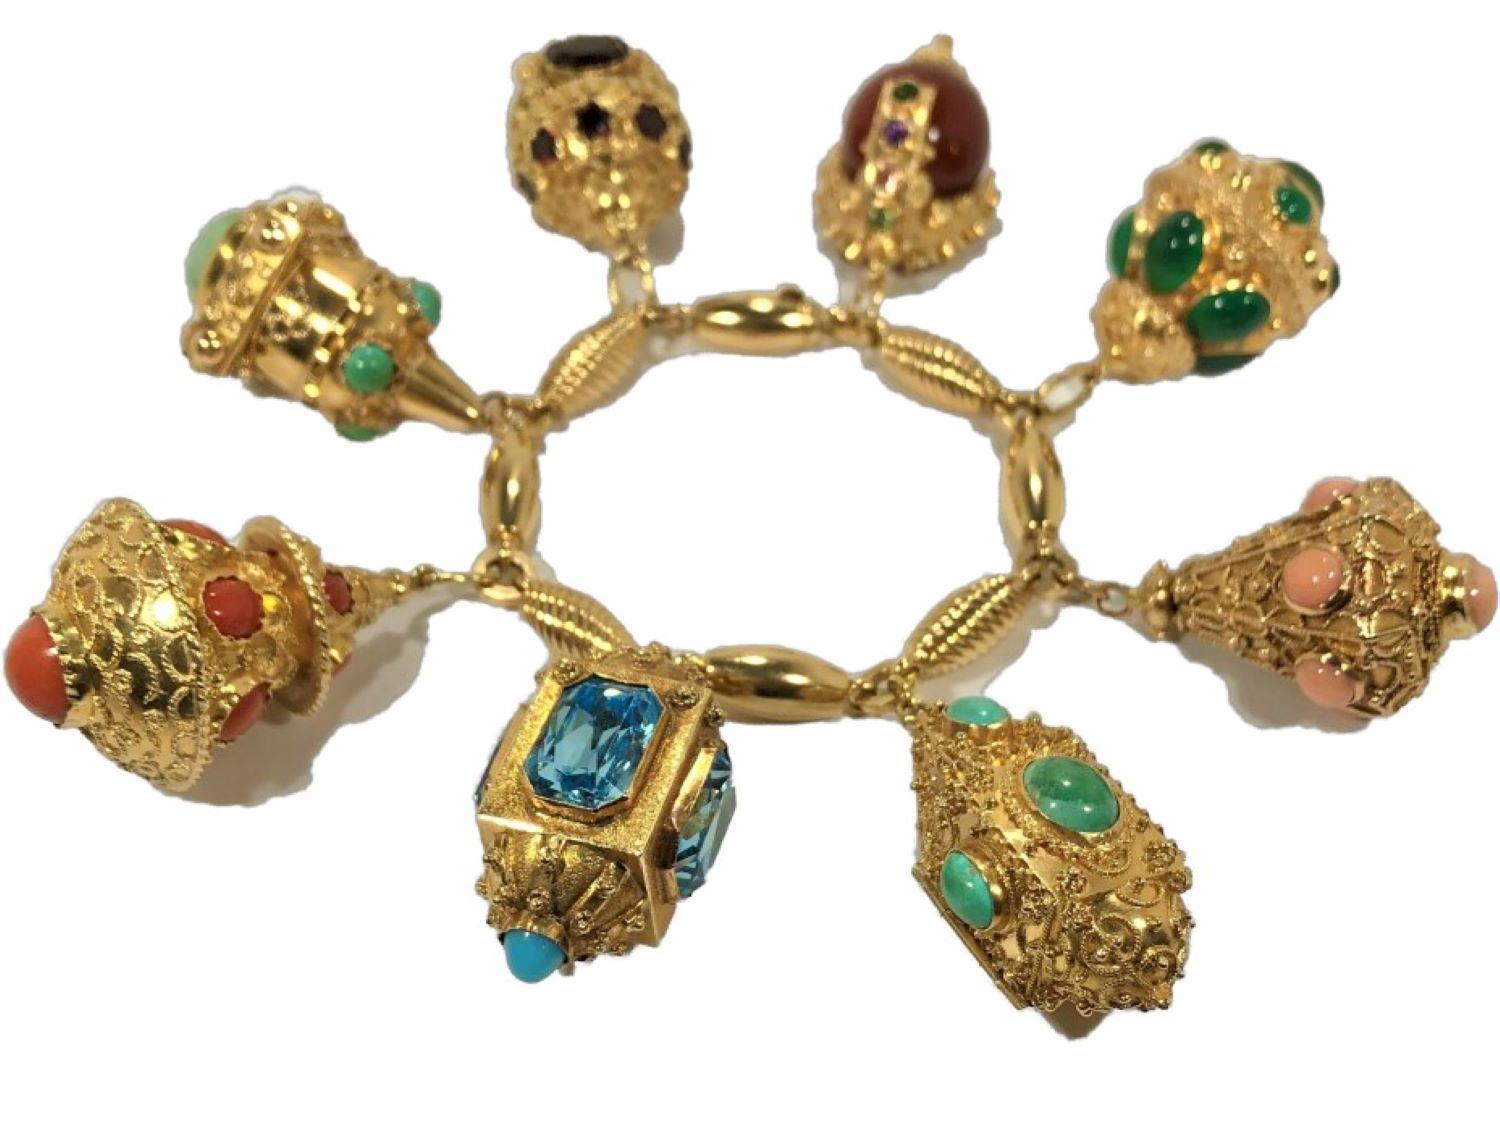 This lovely 18K Yellow Gold bracelet, itself created in Verona, has mounted to it eight wonderful and large Etruscan Revival charms measuring from 1 1/4 inches to 1 1/2 inches, replete with a tremendous amount of hand crafting and wonderful detail.